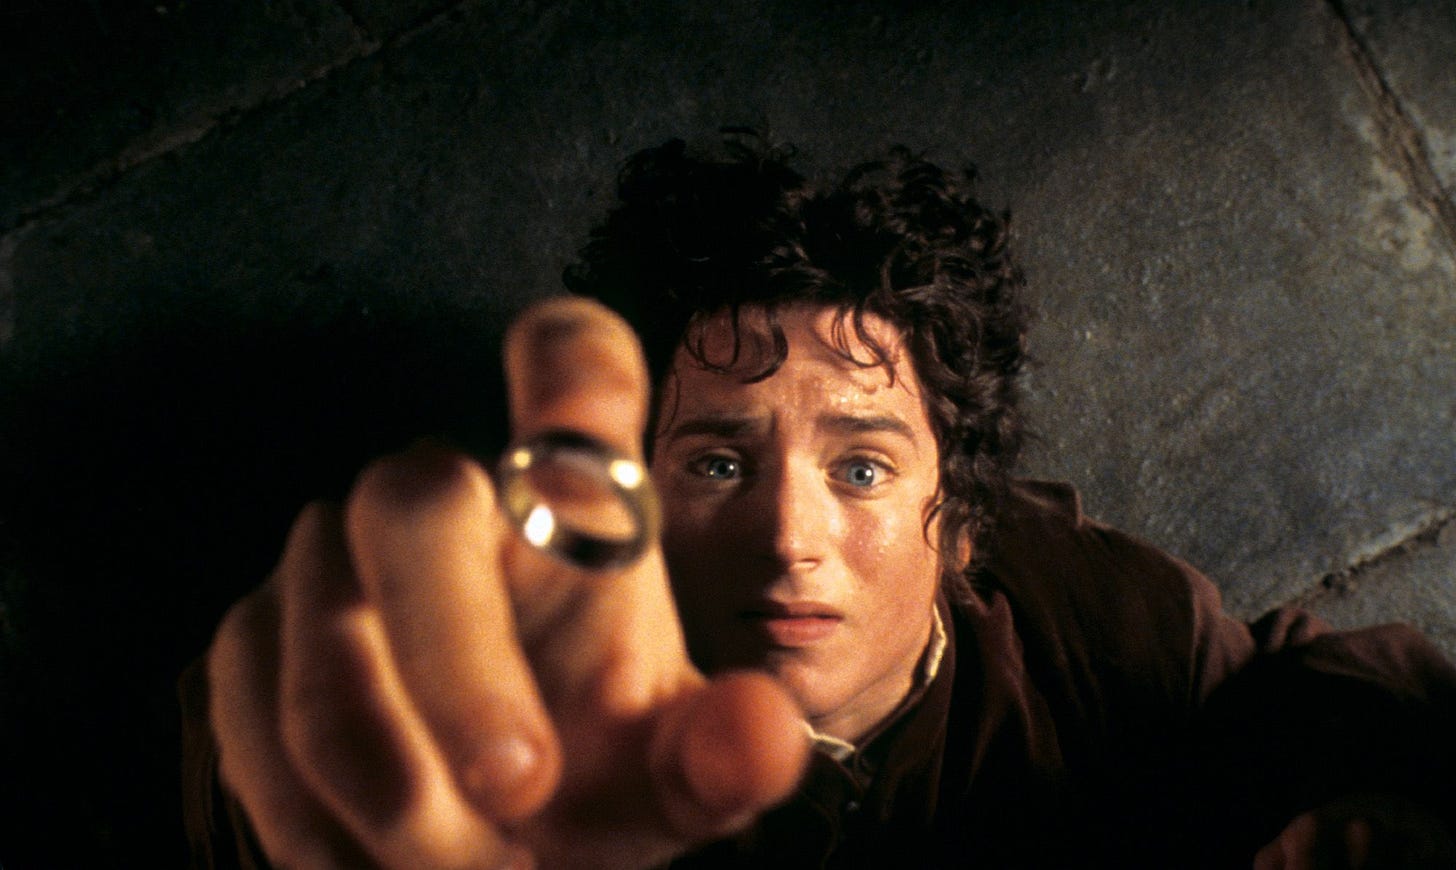 Lord of the Rings' movie series in the works at Warner Bros. | CNN